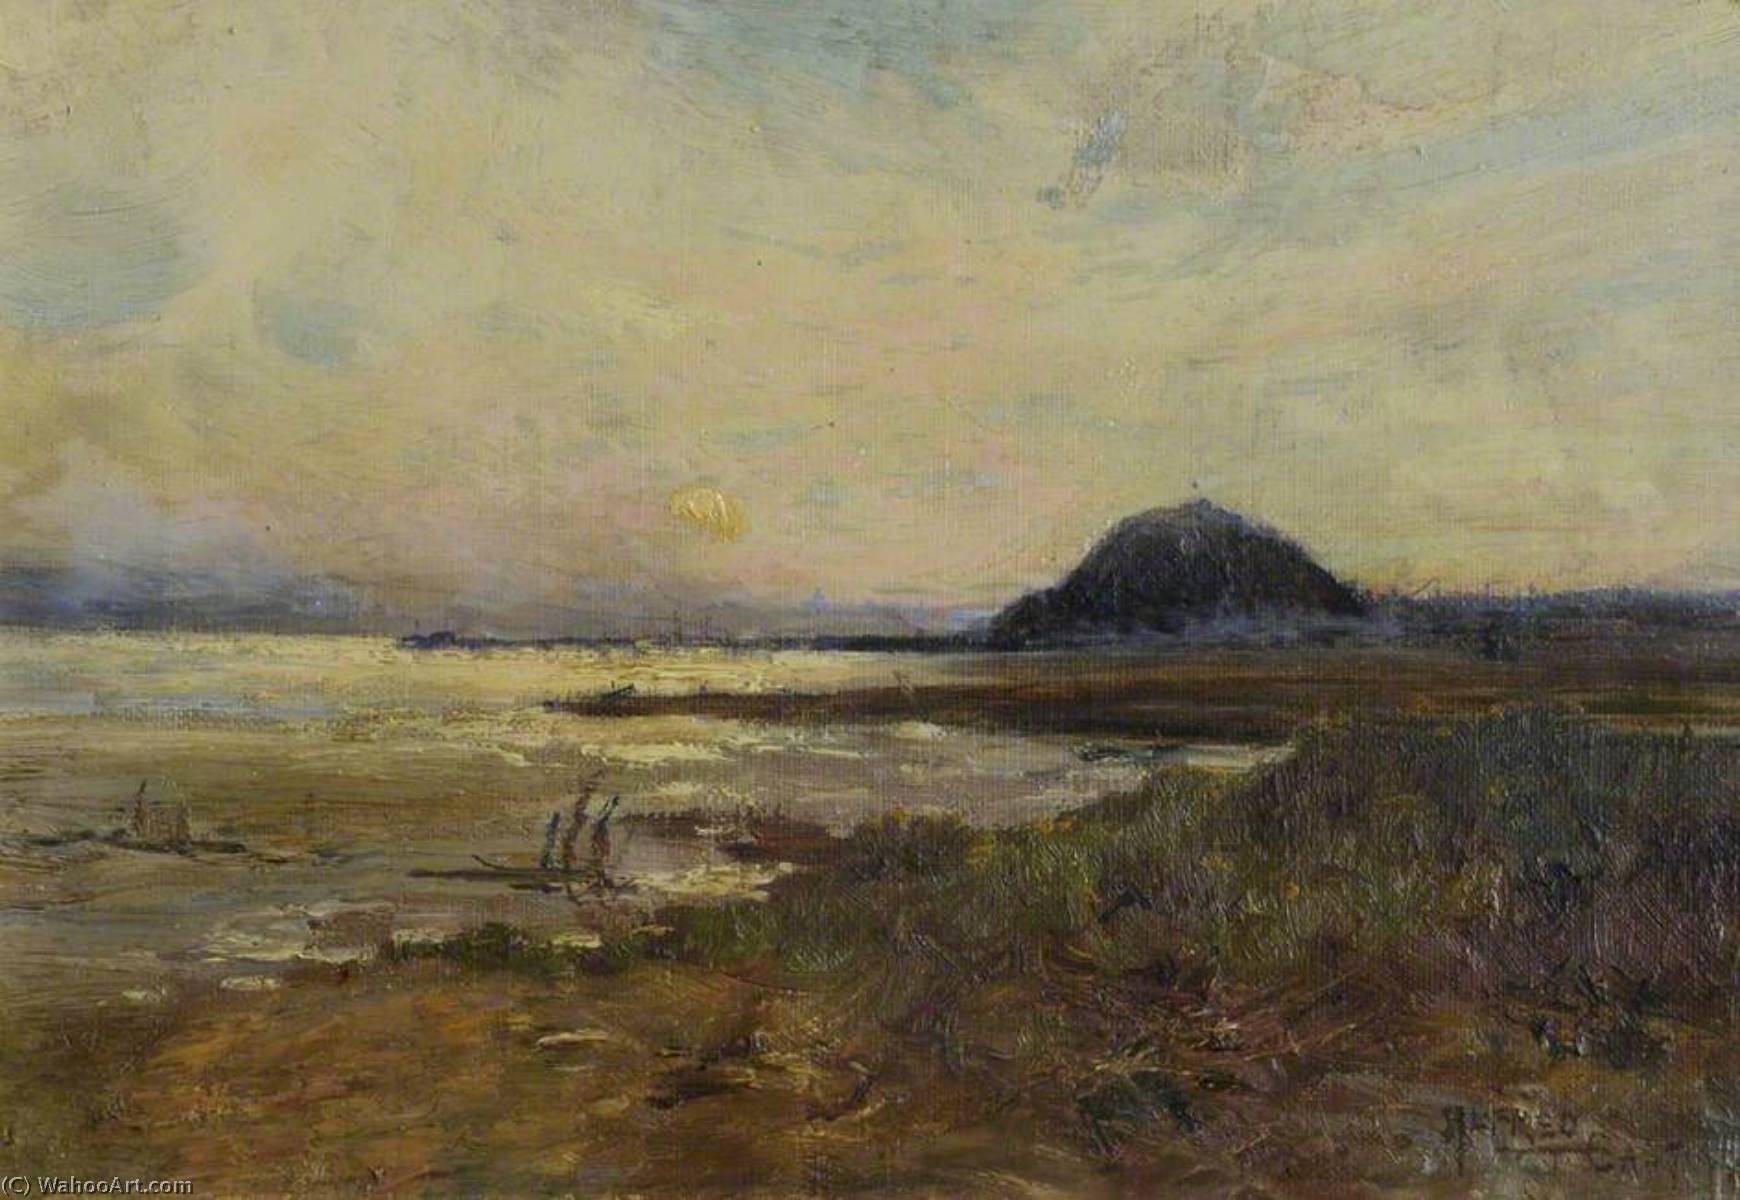 WikiOO.org - Encyclopedia of Fine Arts - Malba, Artwork Alfred East - Holy Isle, Firth of Clyde